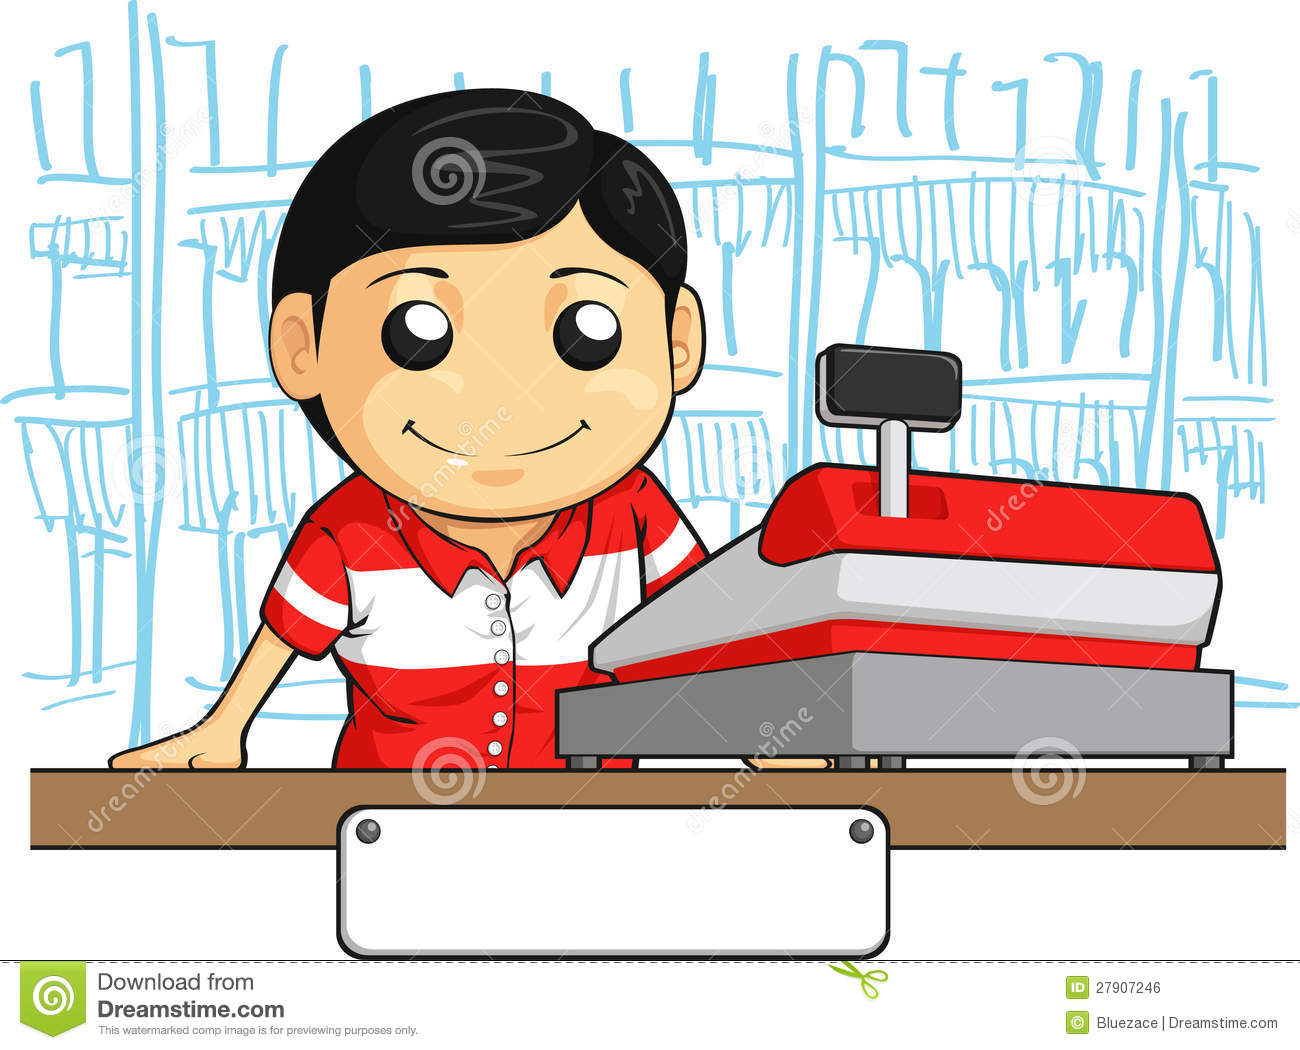 Cashier Employee With Friendly Smile Royalty Free Stock Image   Image